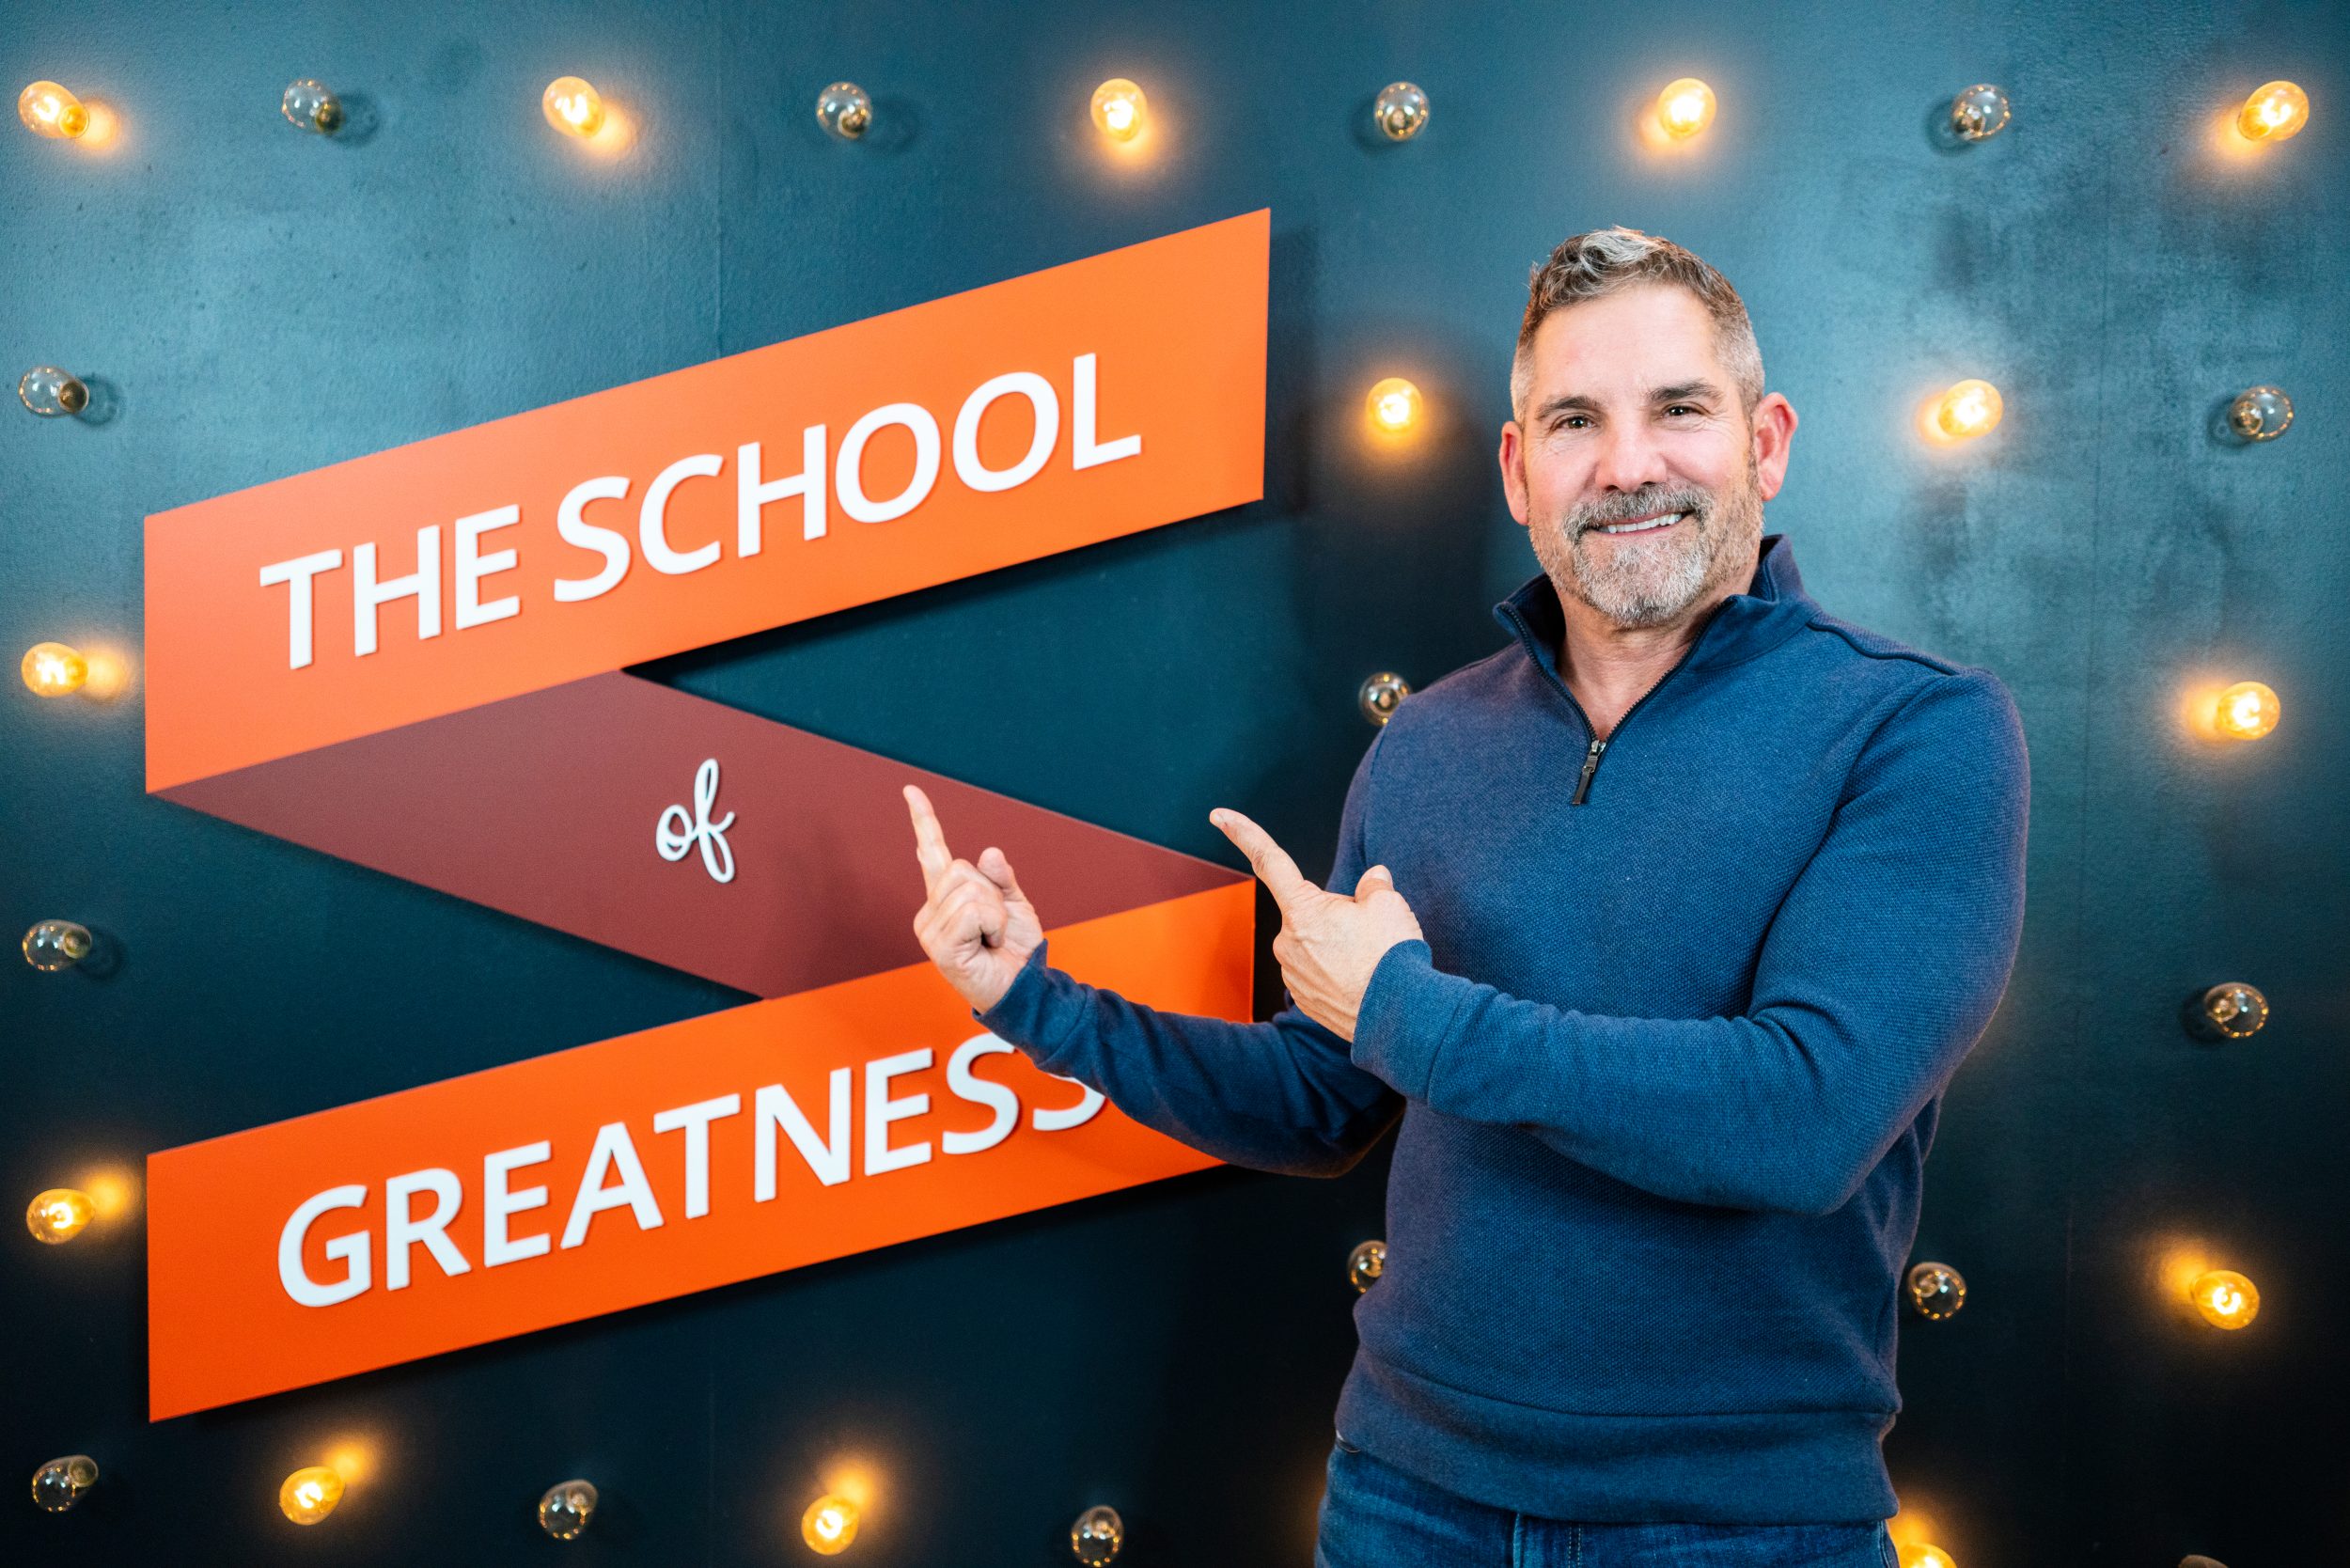 Grant Cardone Limiting Beliefs & Begin Investing In Yourself